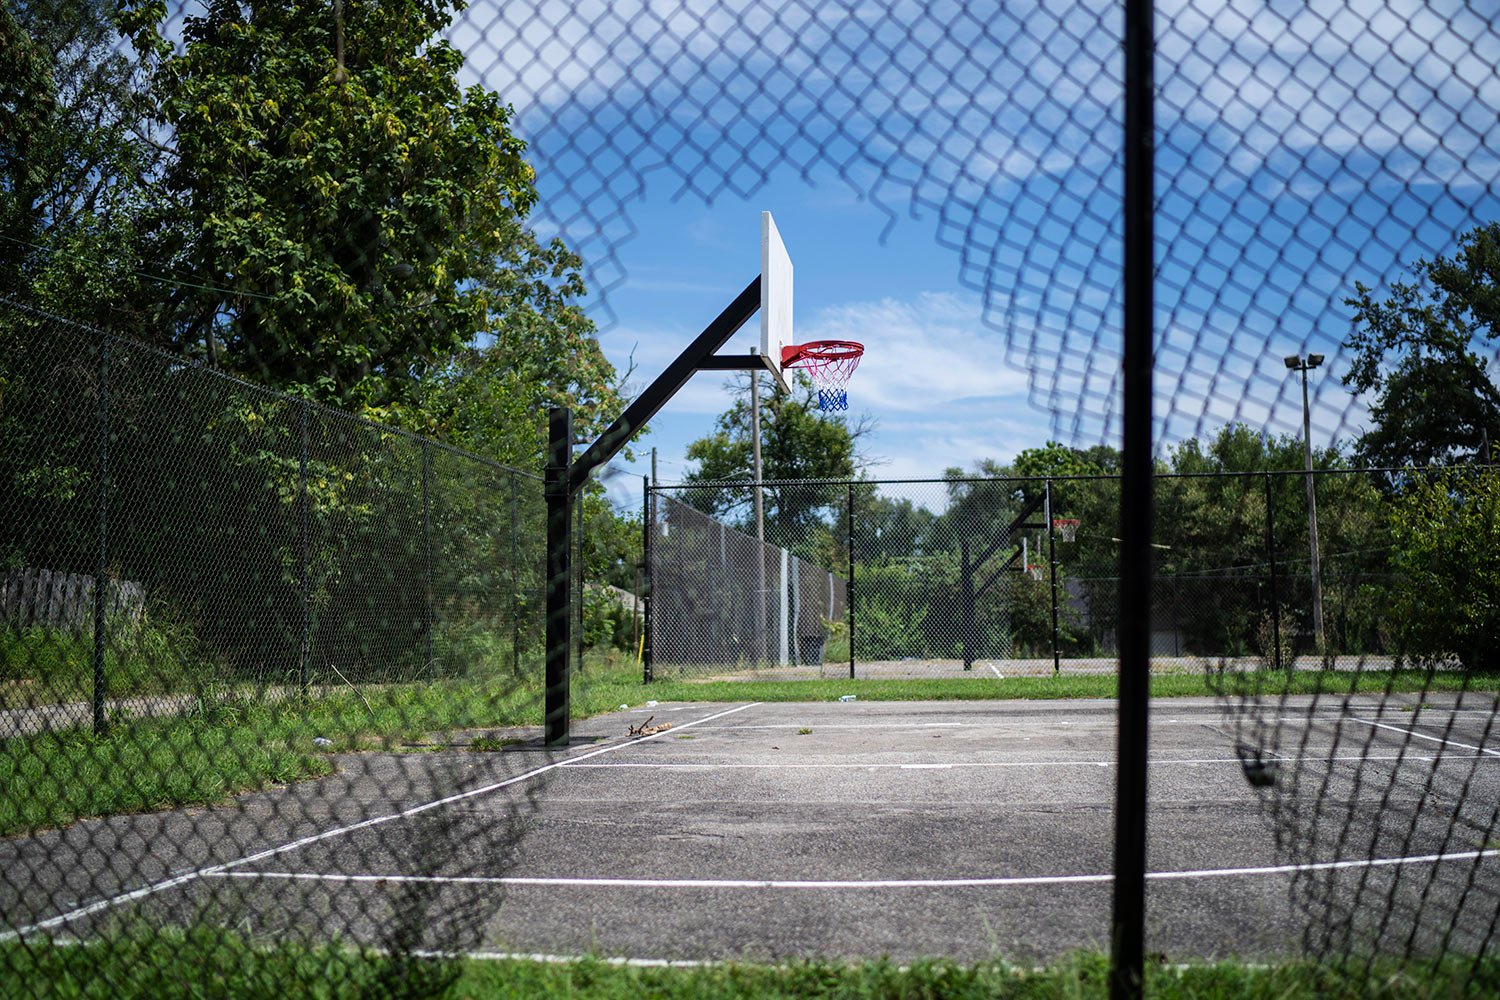  A whole in a fence frames a basketball hoop at Ballard park where Victoria Gwynn was shot and injured in 2021 in Louisville, Ky, Tuesday, Aug. 29, 2023. The 17-year-old friend she was there to meet was killed. (AP Photo/David Goldman)  